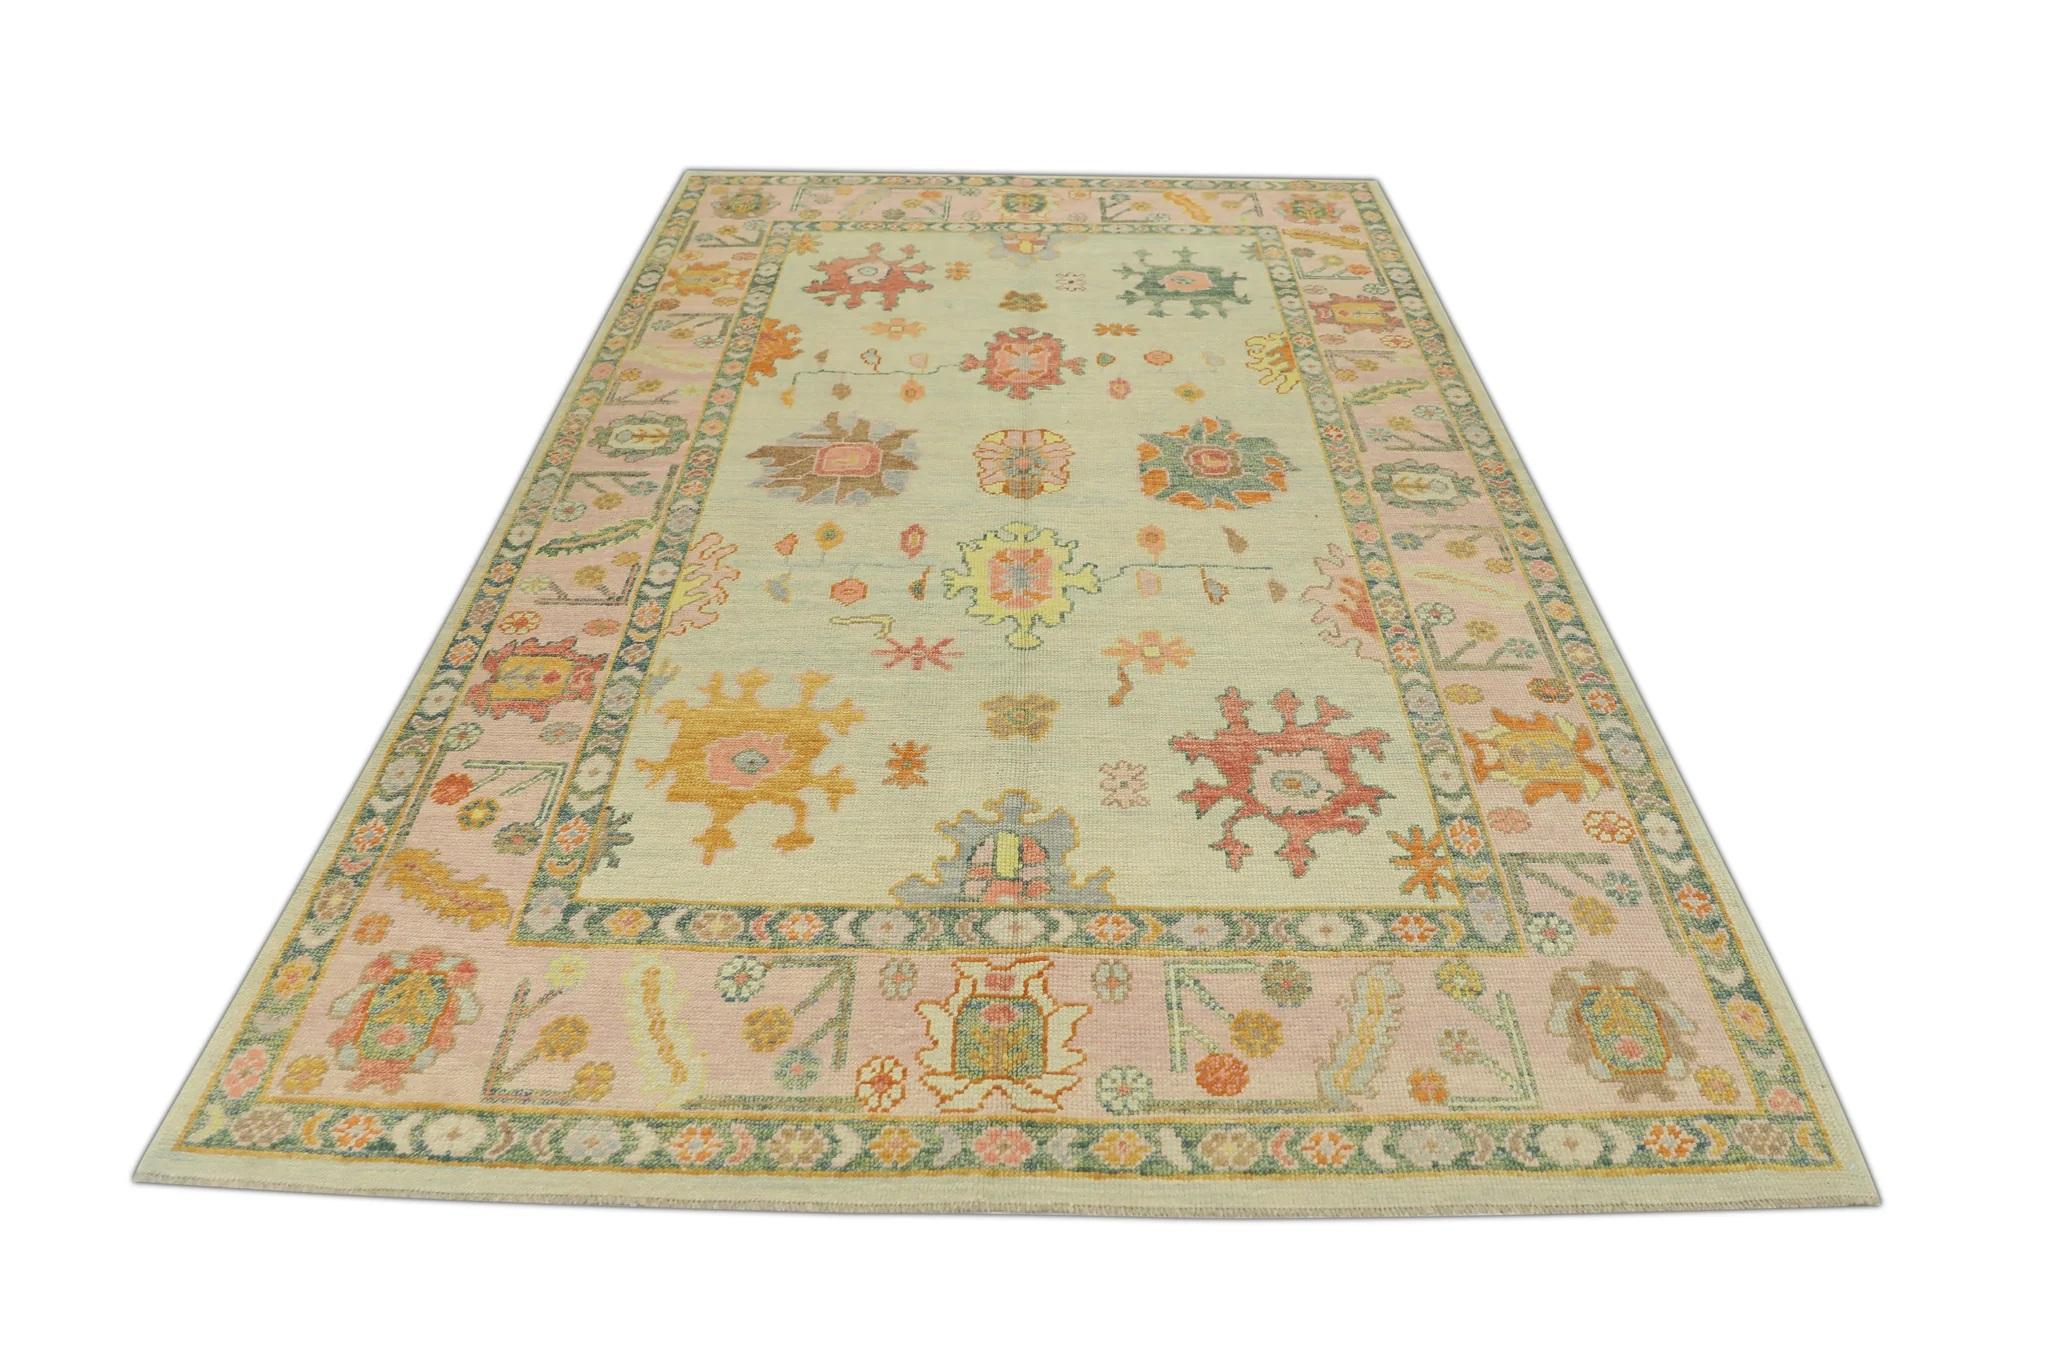 Green and Pink Floral Design Handwoven Wool Turkish Oushak Rug 6' x 9'6